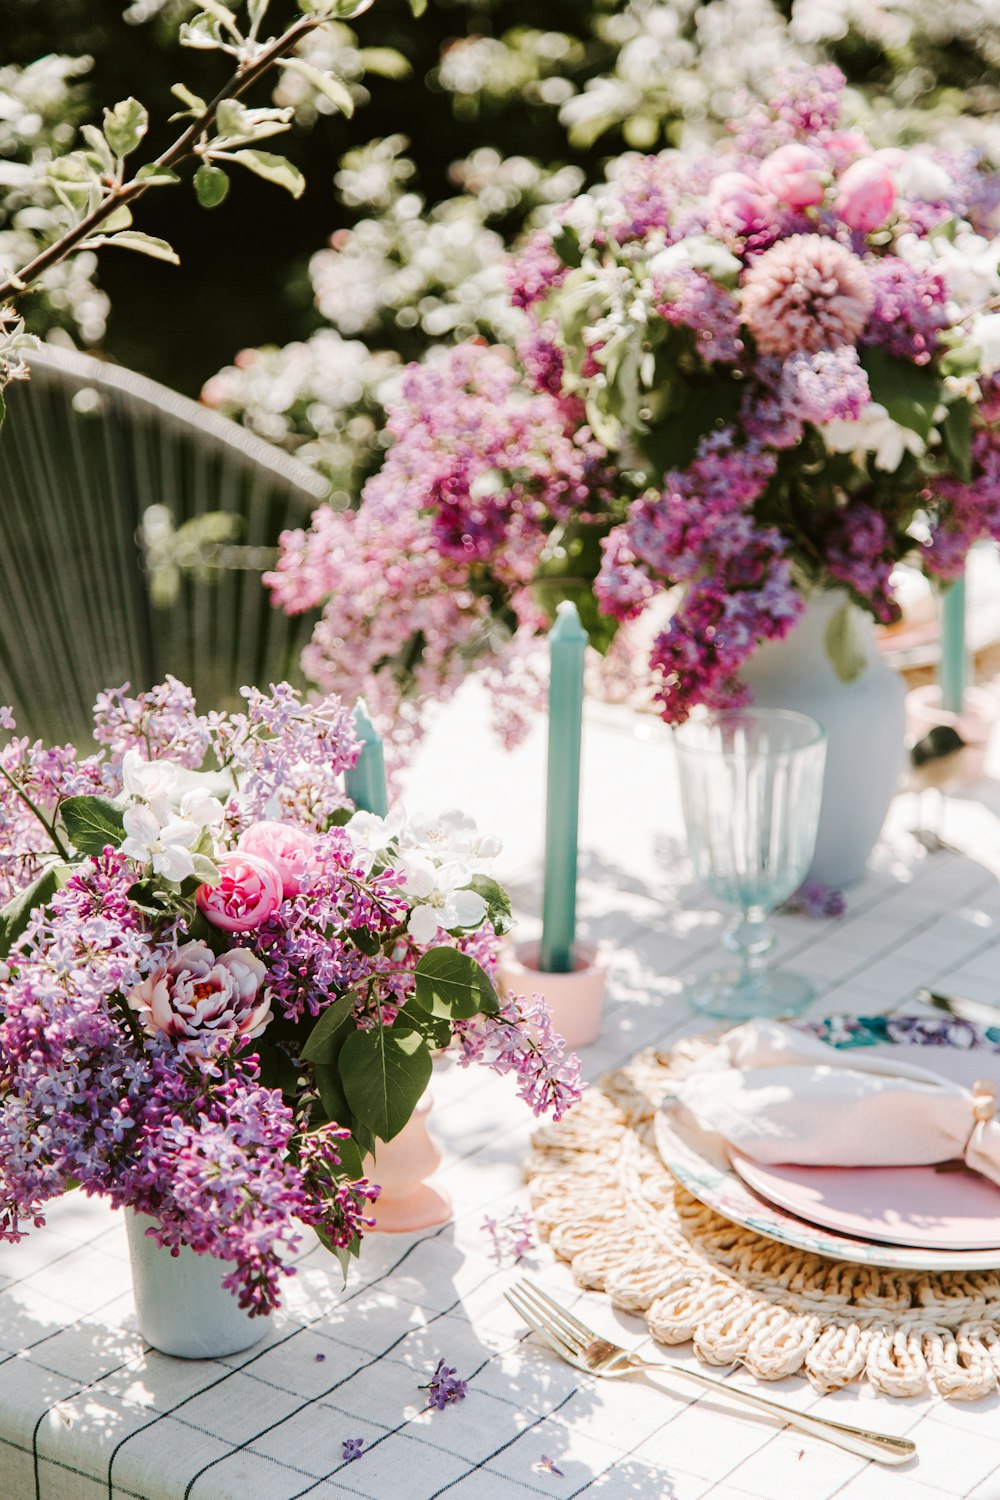 a table with flowers and plates